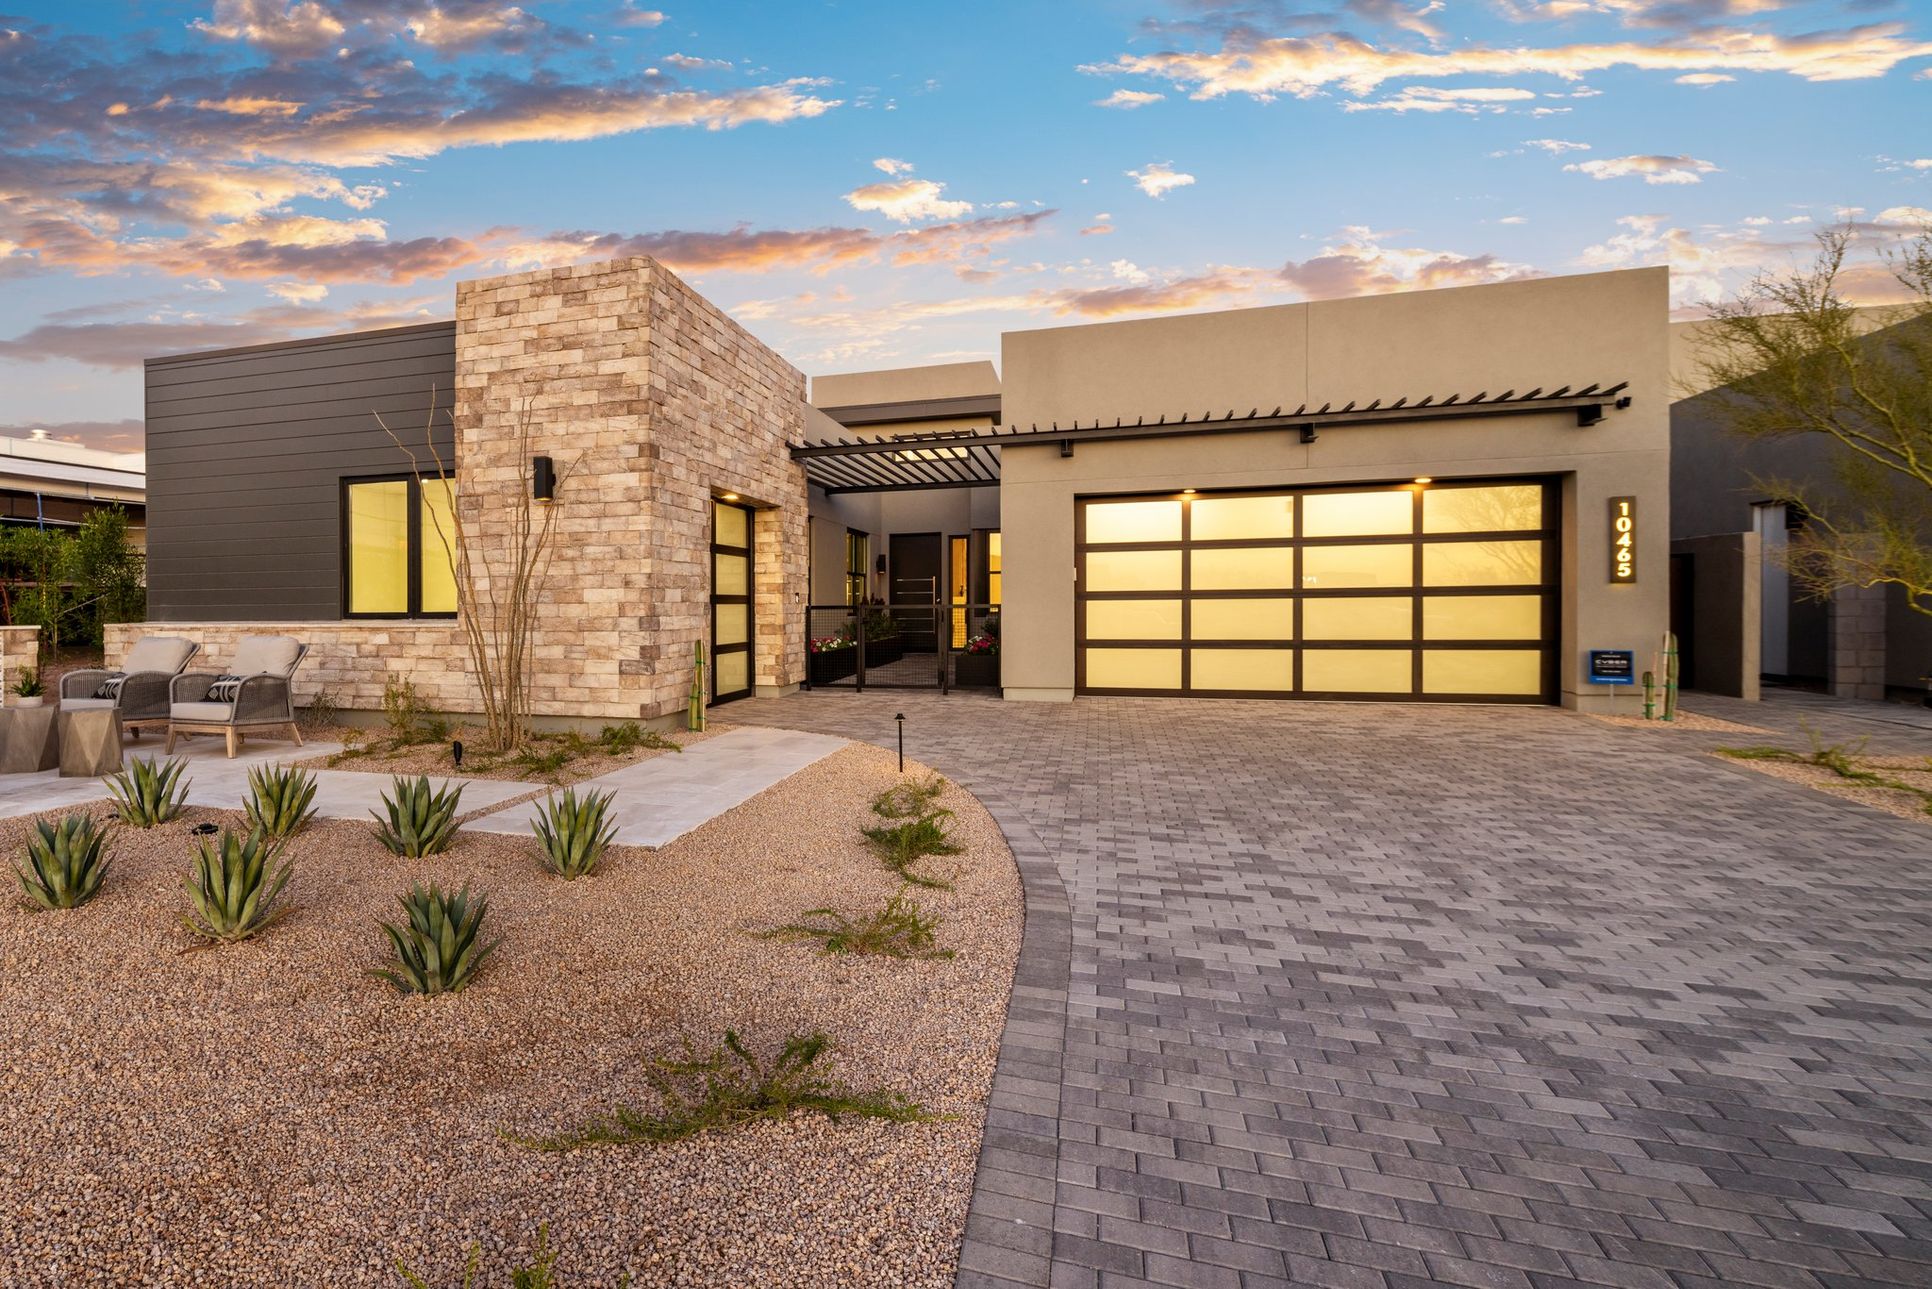 Aura by Camelot Homes:Situated in the Shea corridor of Scottsdale featuring two single story plans in a gated enclave of 12 home sites.